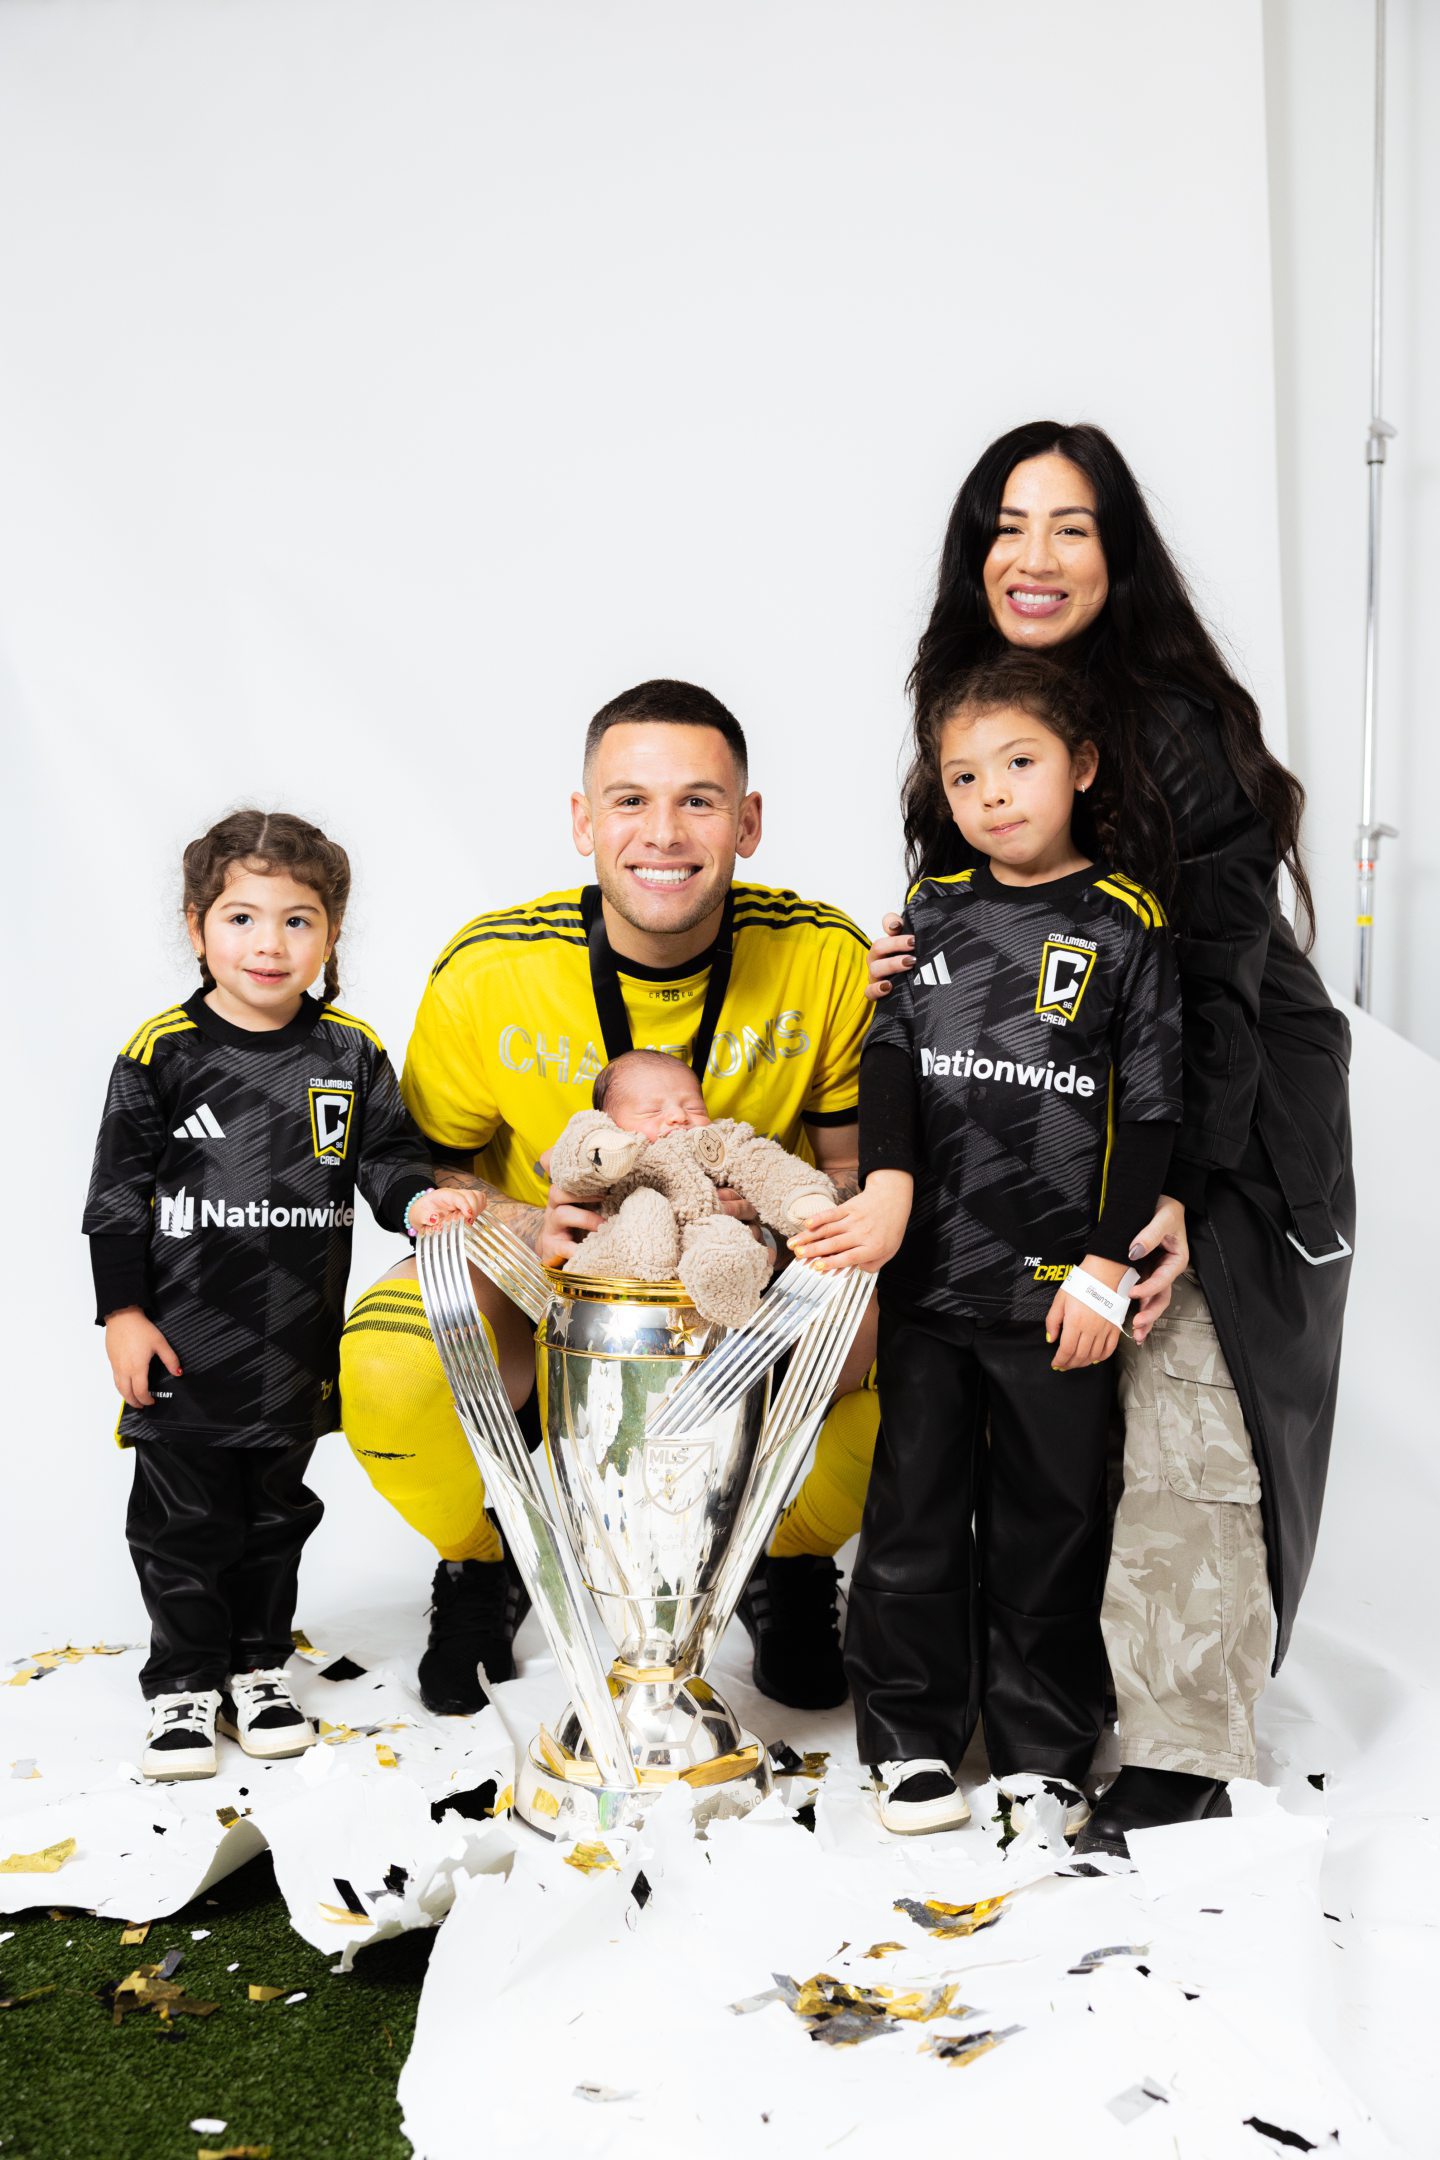 Christian Ramirez and his family with the MLS Cup trophy. Left to right Zara, Christian, Nova, wife Valerie - with son Kash in the trophy. Image supplied by Columbus Crew 